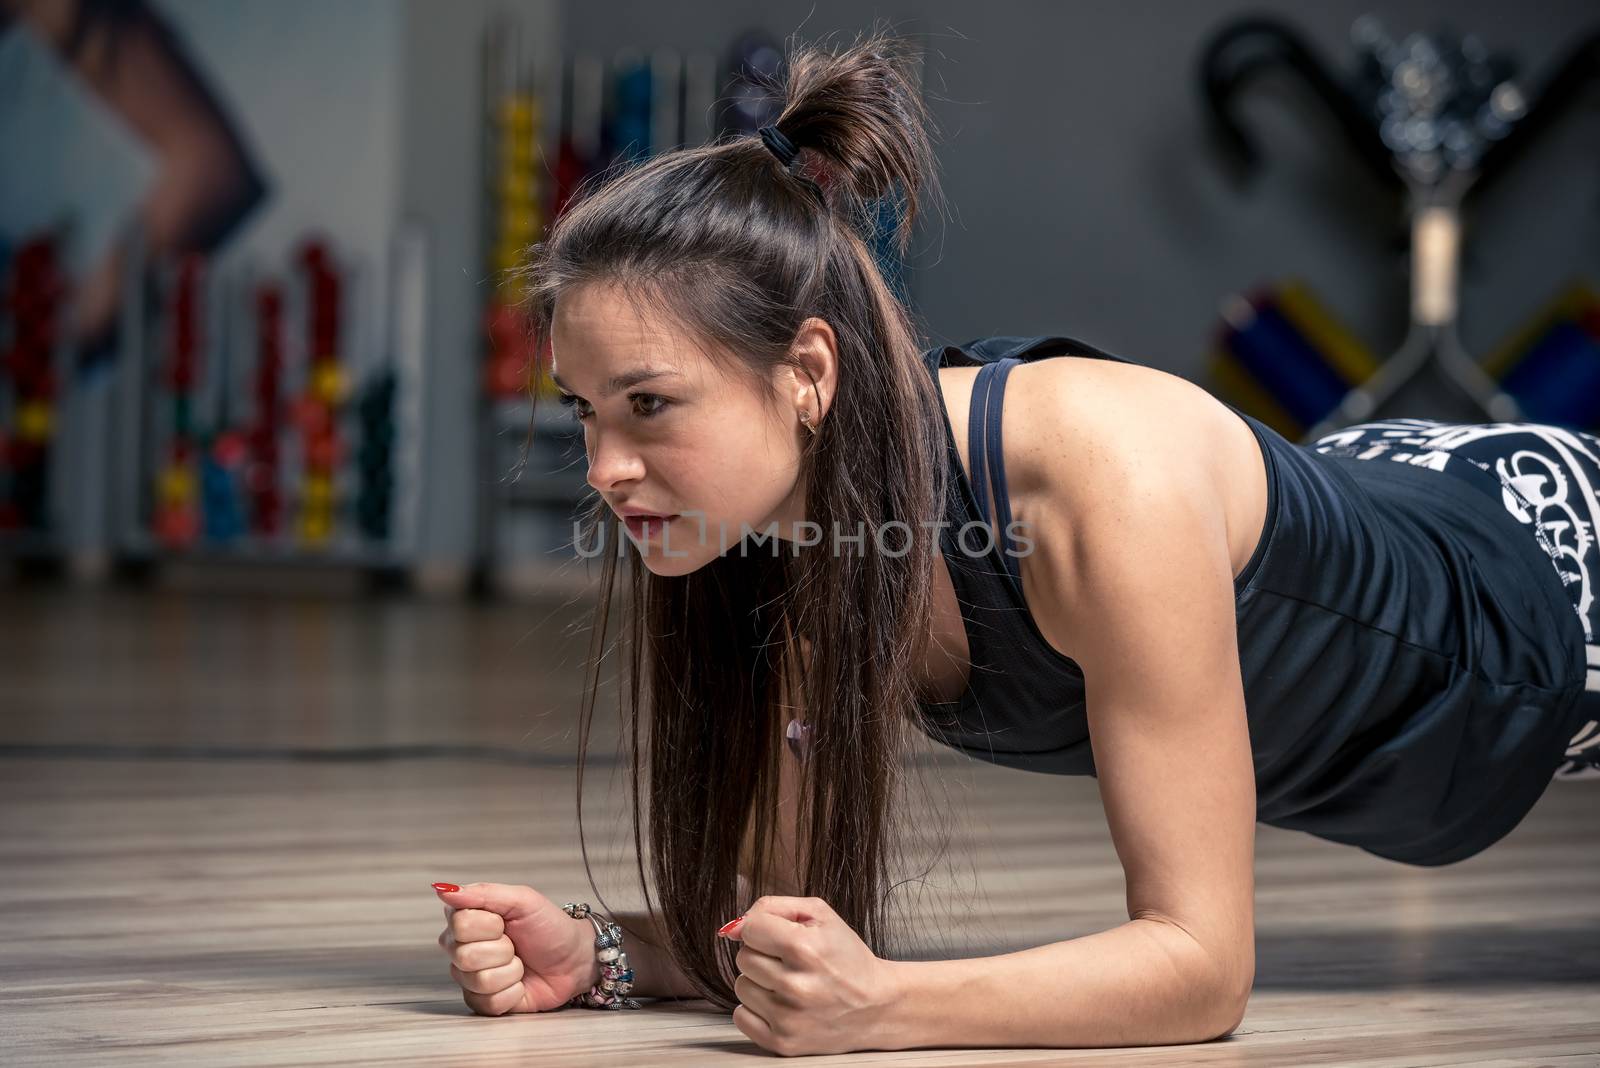 hardy woman performing an exercise strap on the floor in the gym